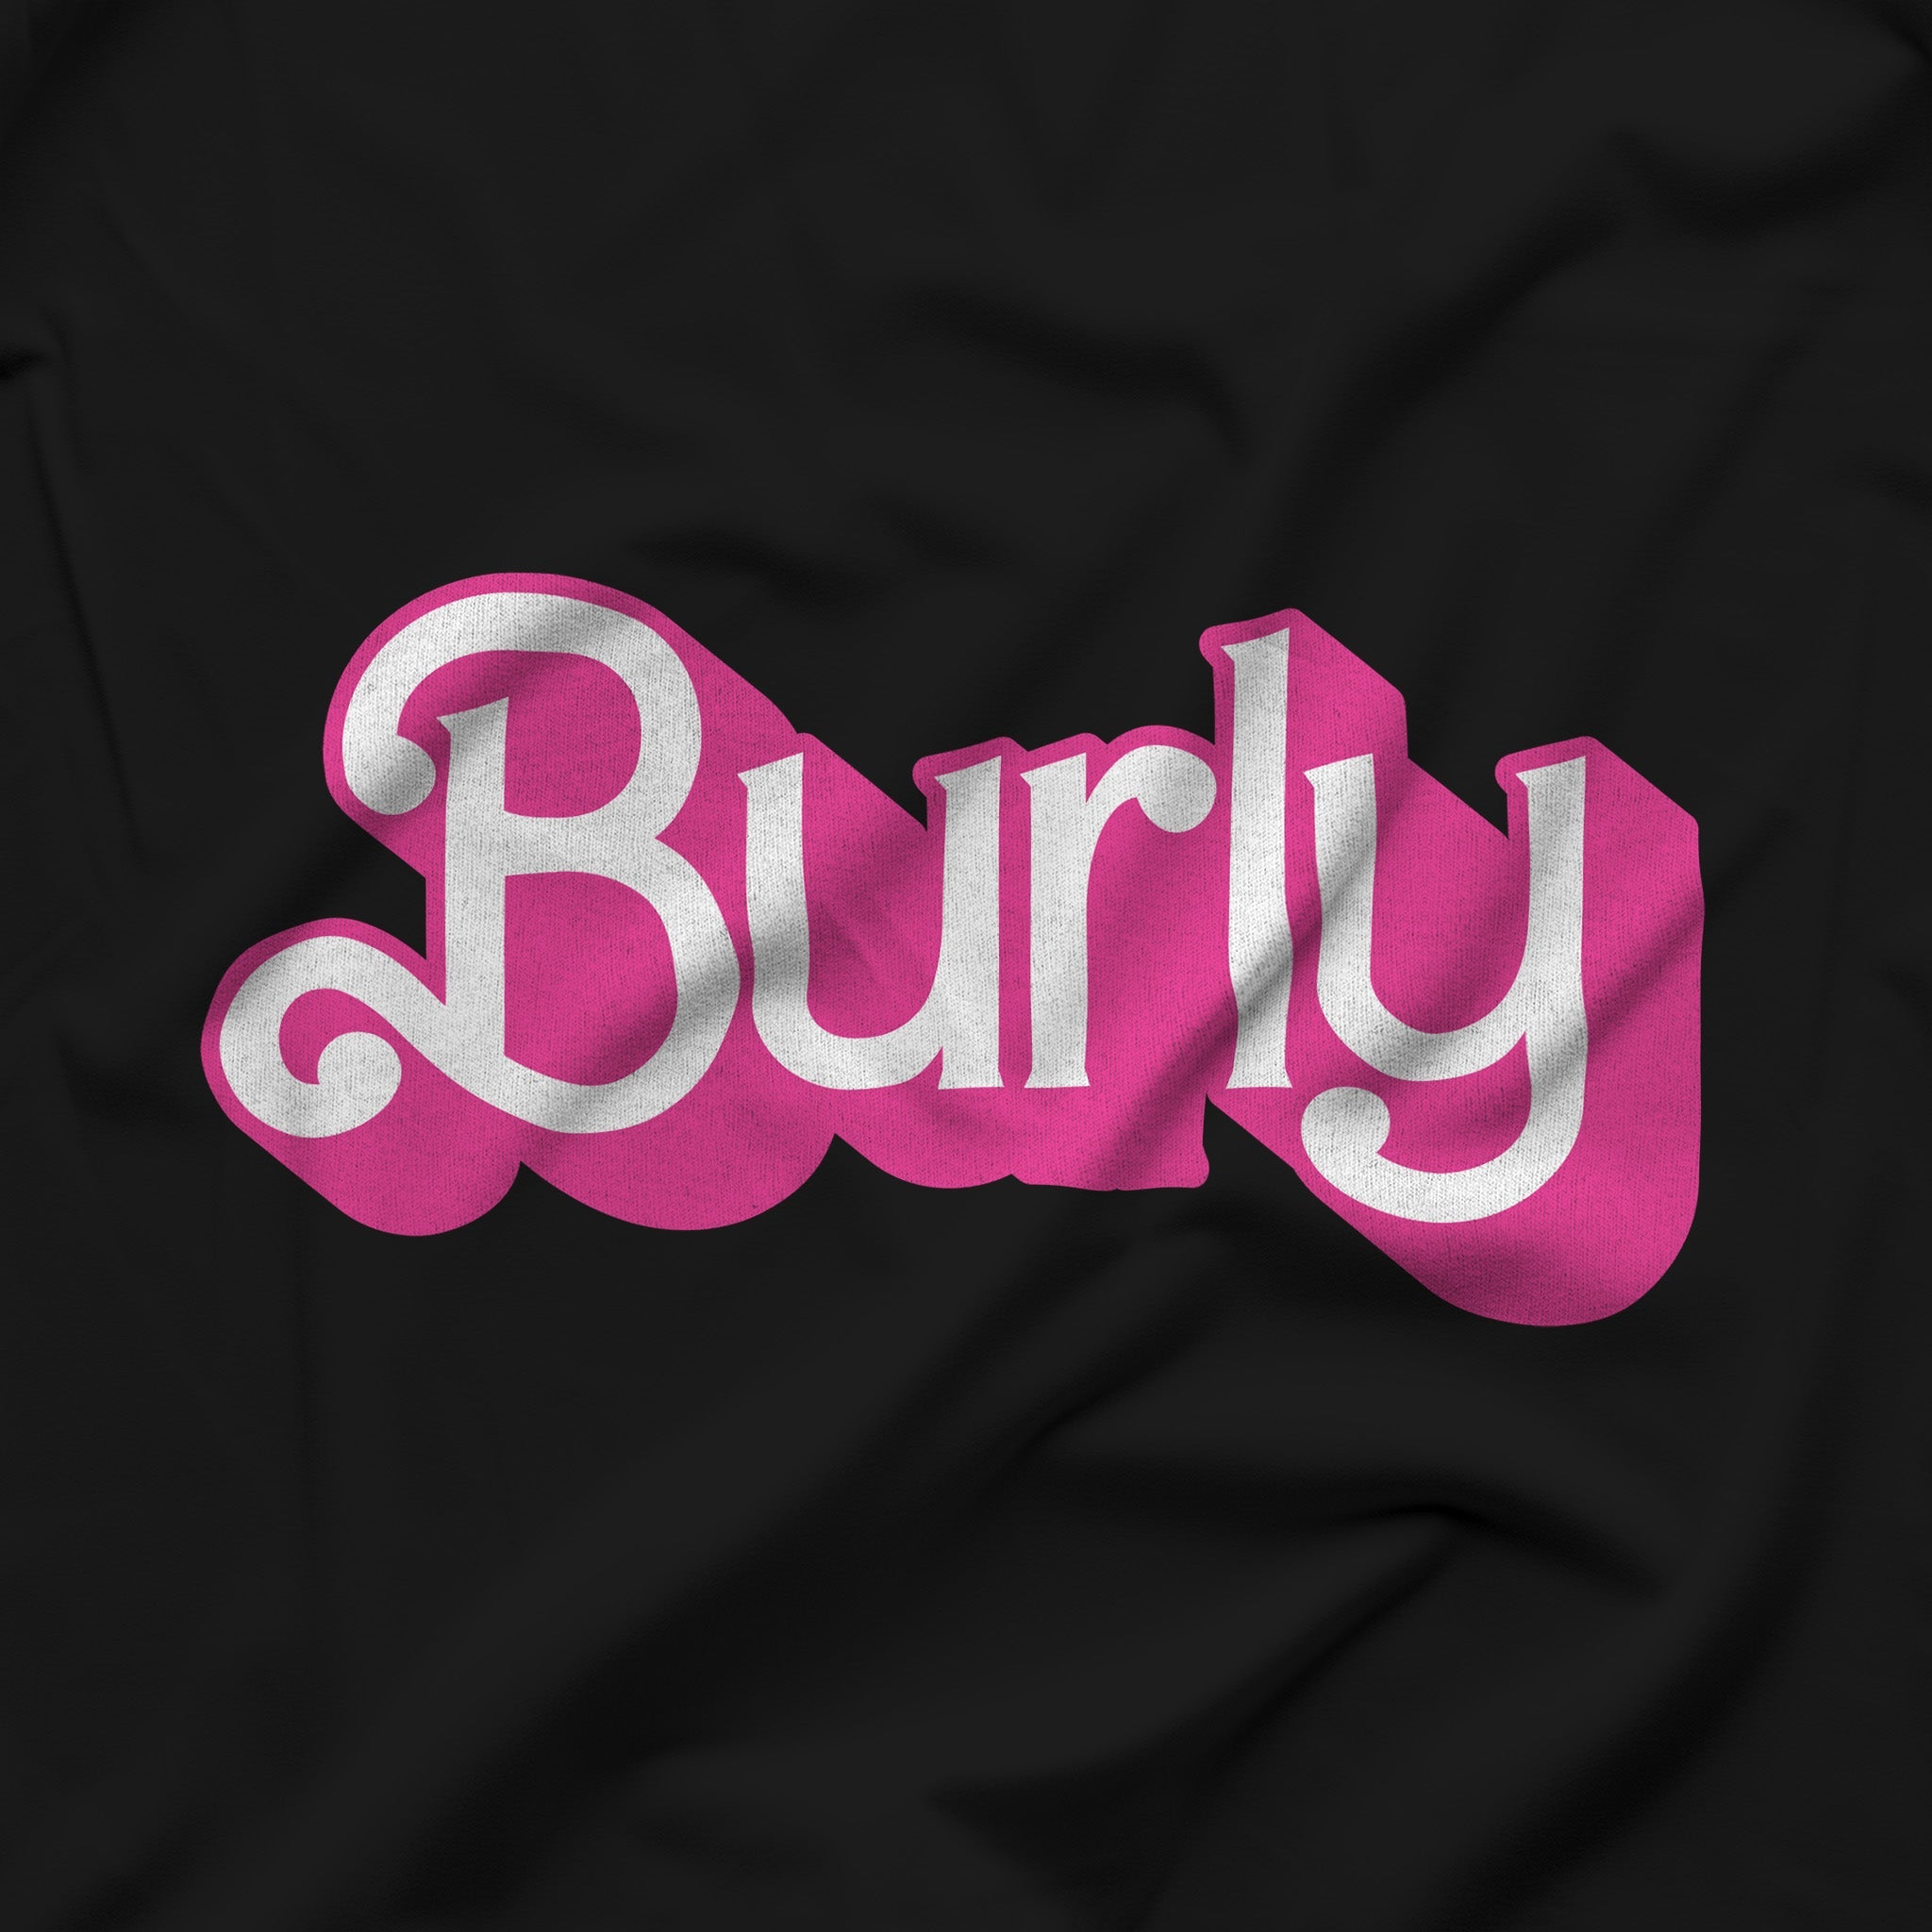 Burly T-Shirt - Celebrating Strength and Charm - Hunky Tops#color_black